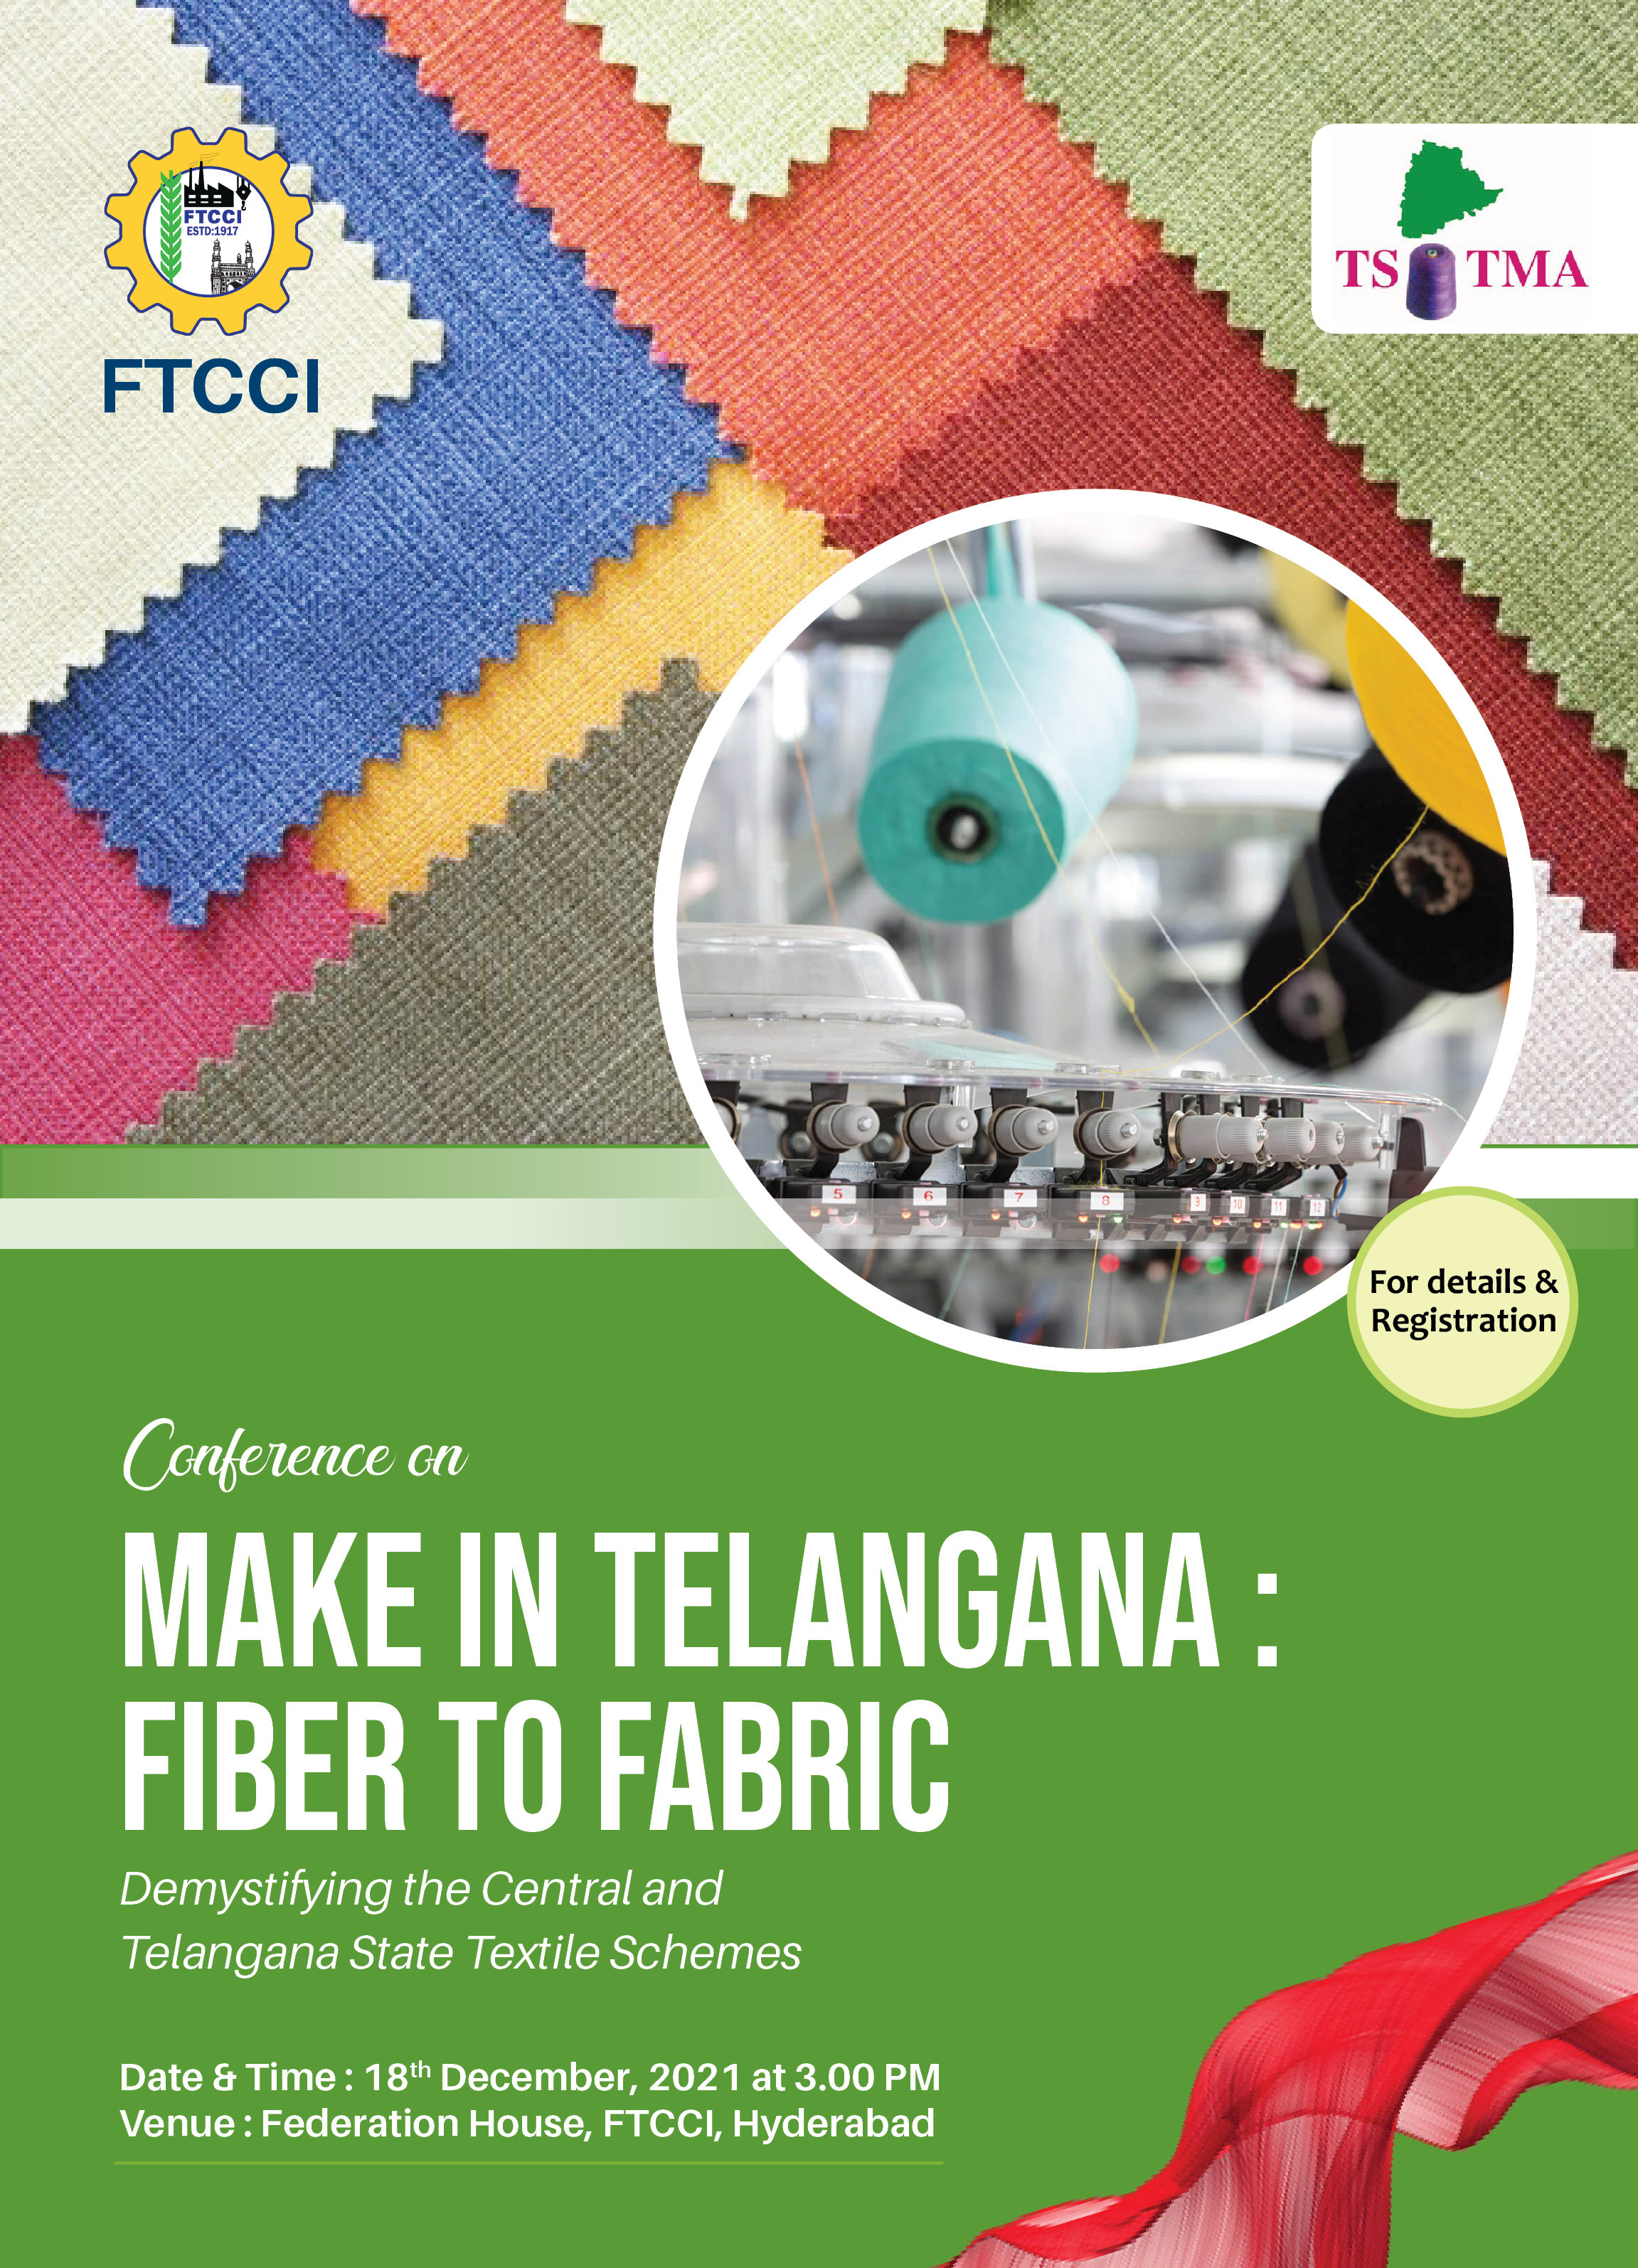 Conference on Make in Telangana : Fiber to Fabric